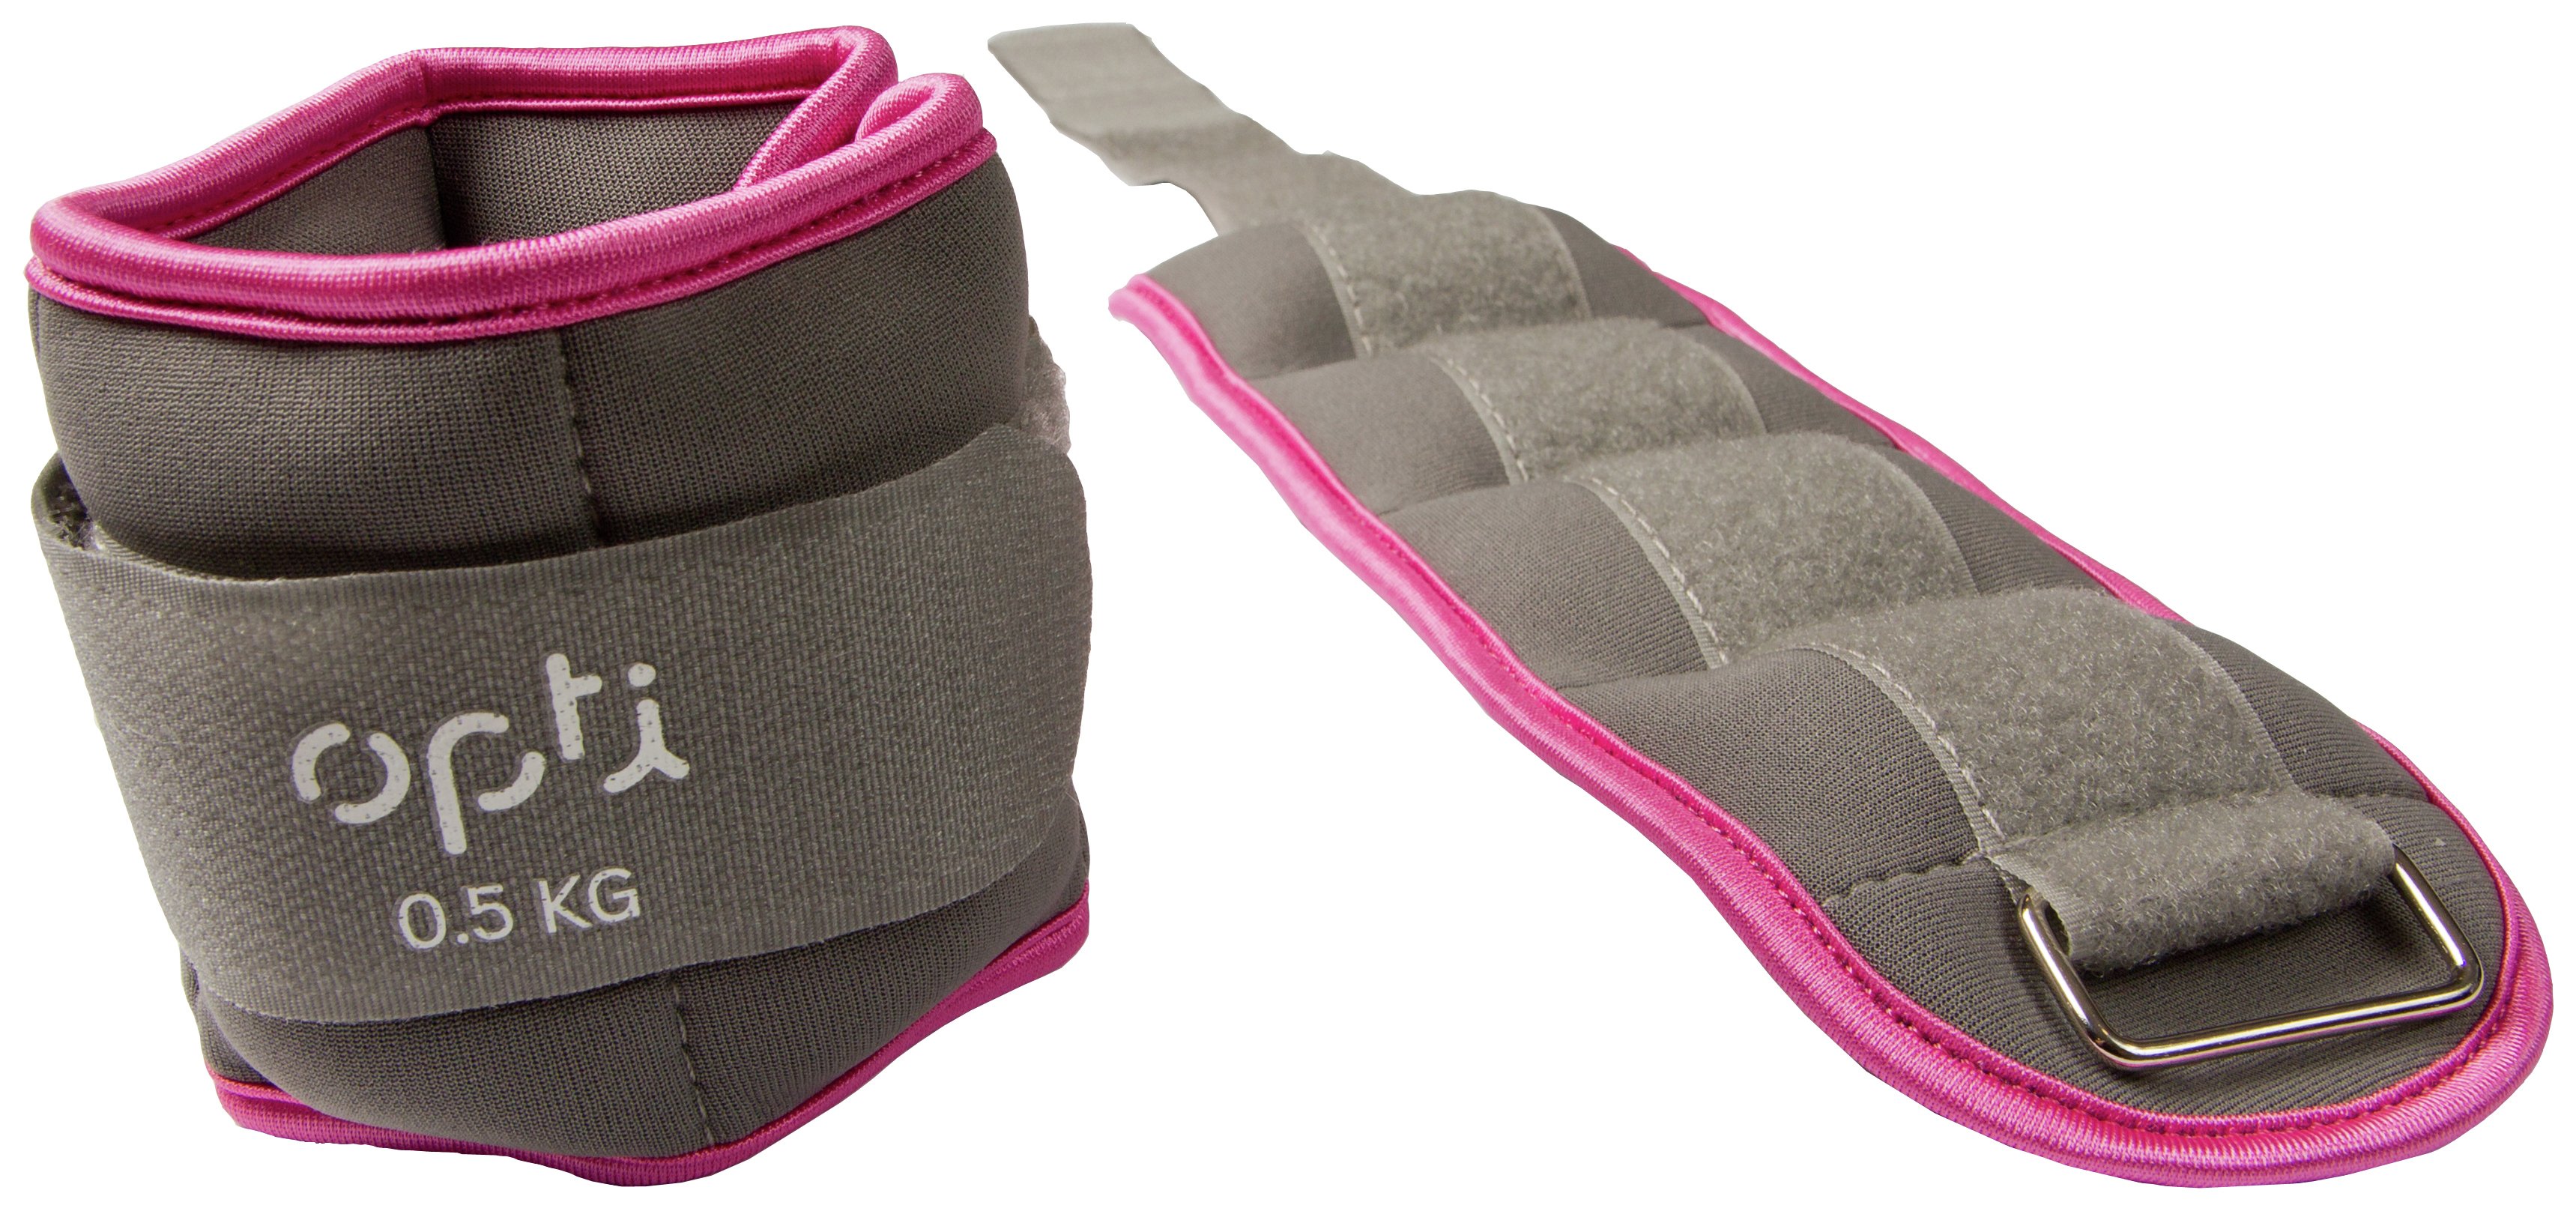 Opti Ankle Weights - 2 x 0.5kg